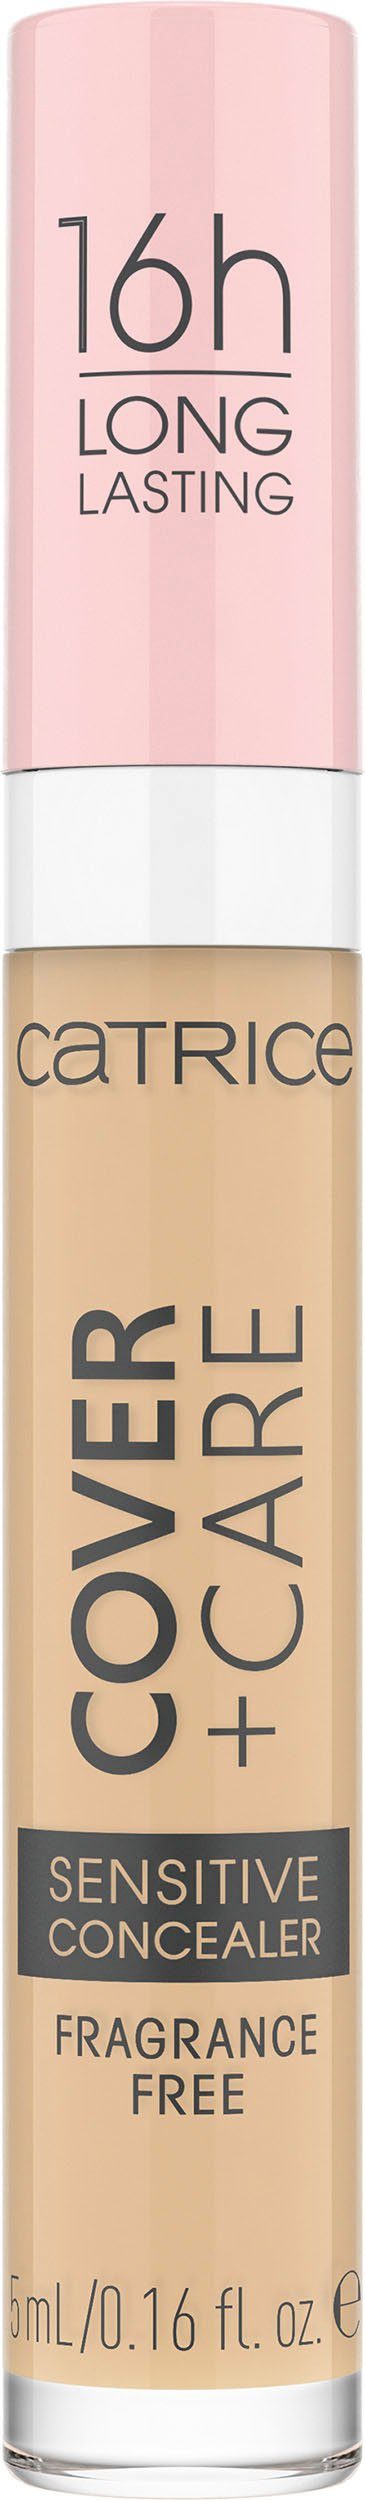 Catrice Concealer Catrice Cover 3-tlg. Care 008W Sensitive nude + Concealer